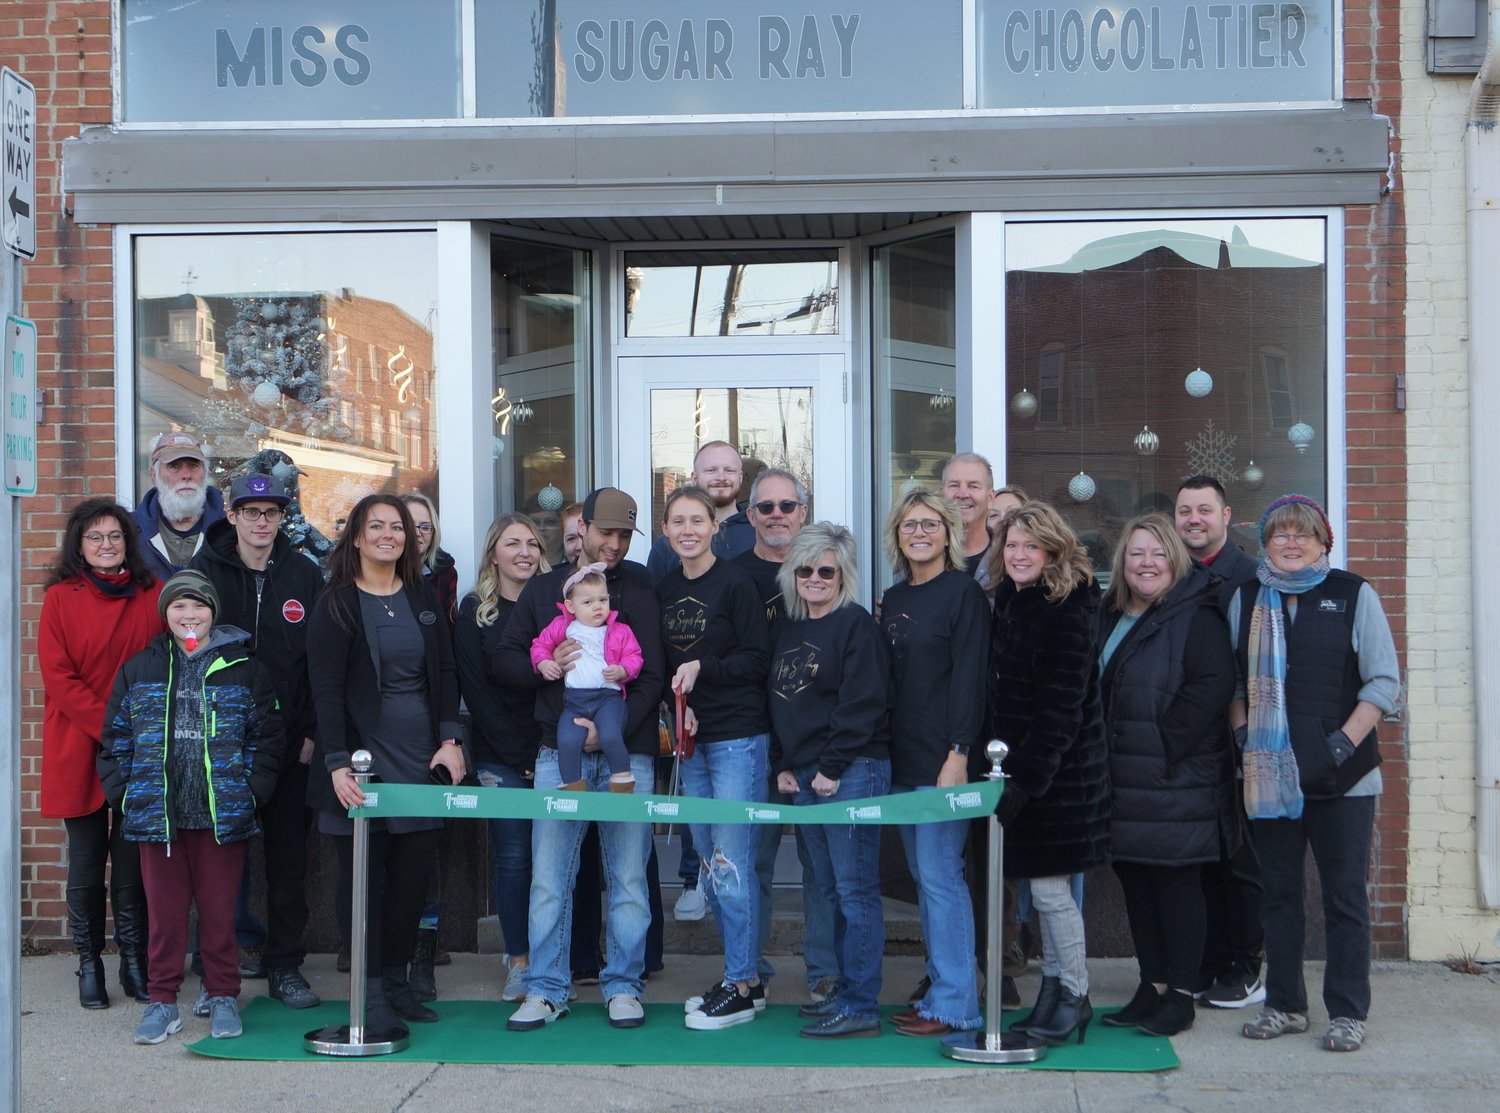 The Chamber welcomed Miss Sugar Ray with a ceremonial ribbon-cutting ceremony.